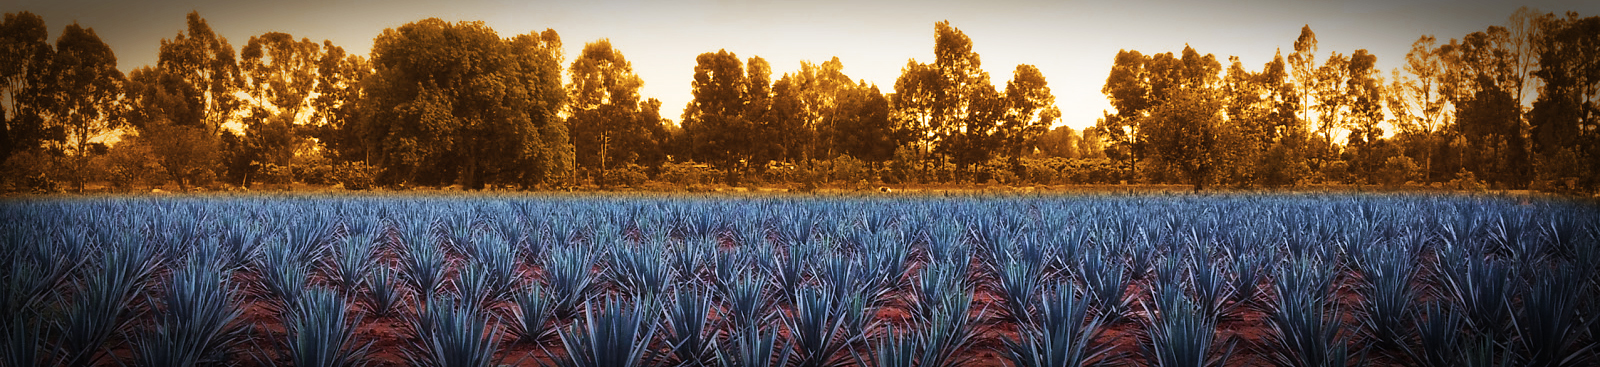 agave-field